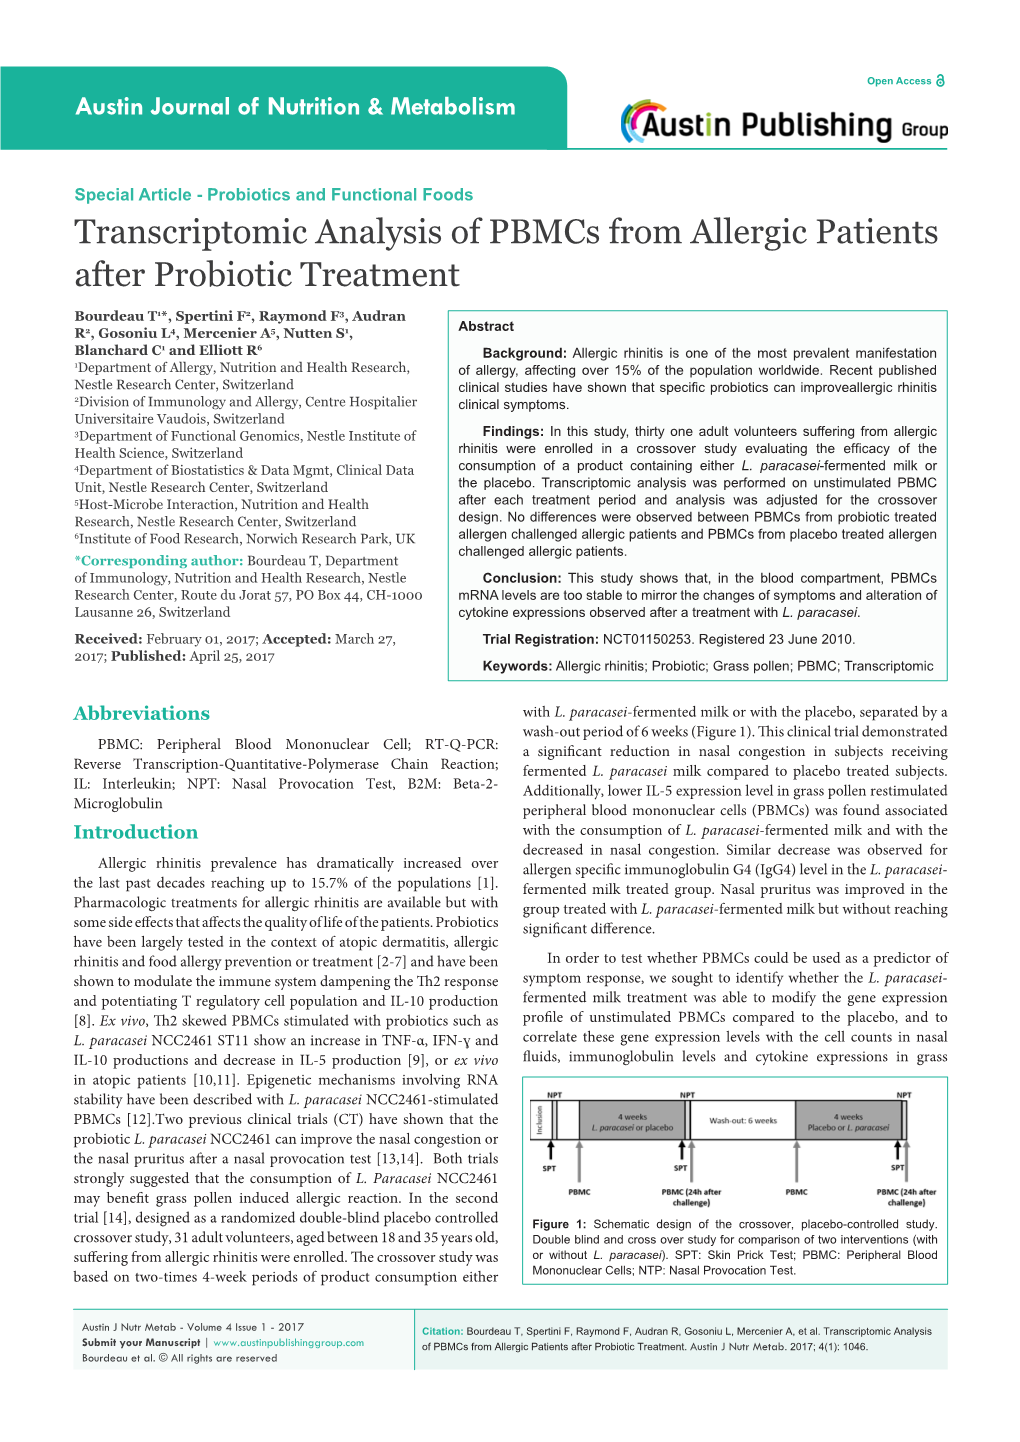 Transcriptomic Analysis of Pbmcs from Allergic Patients After Probiotic Treatment